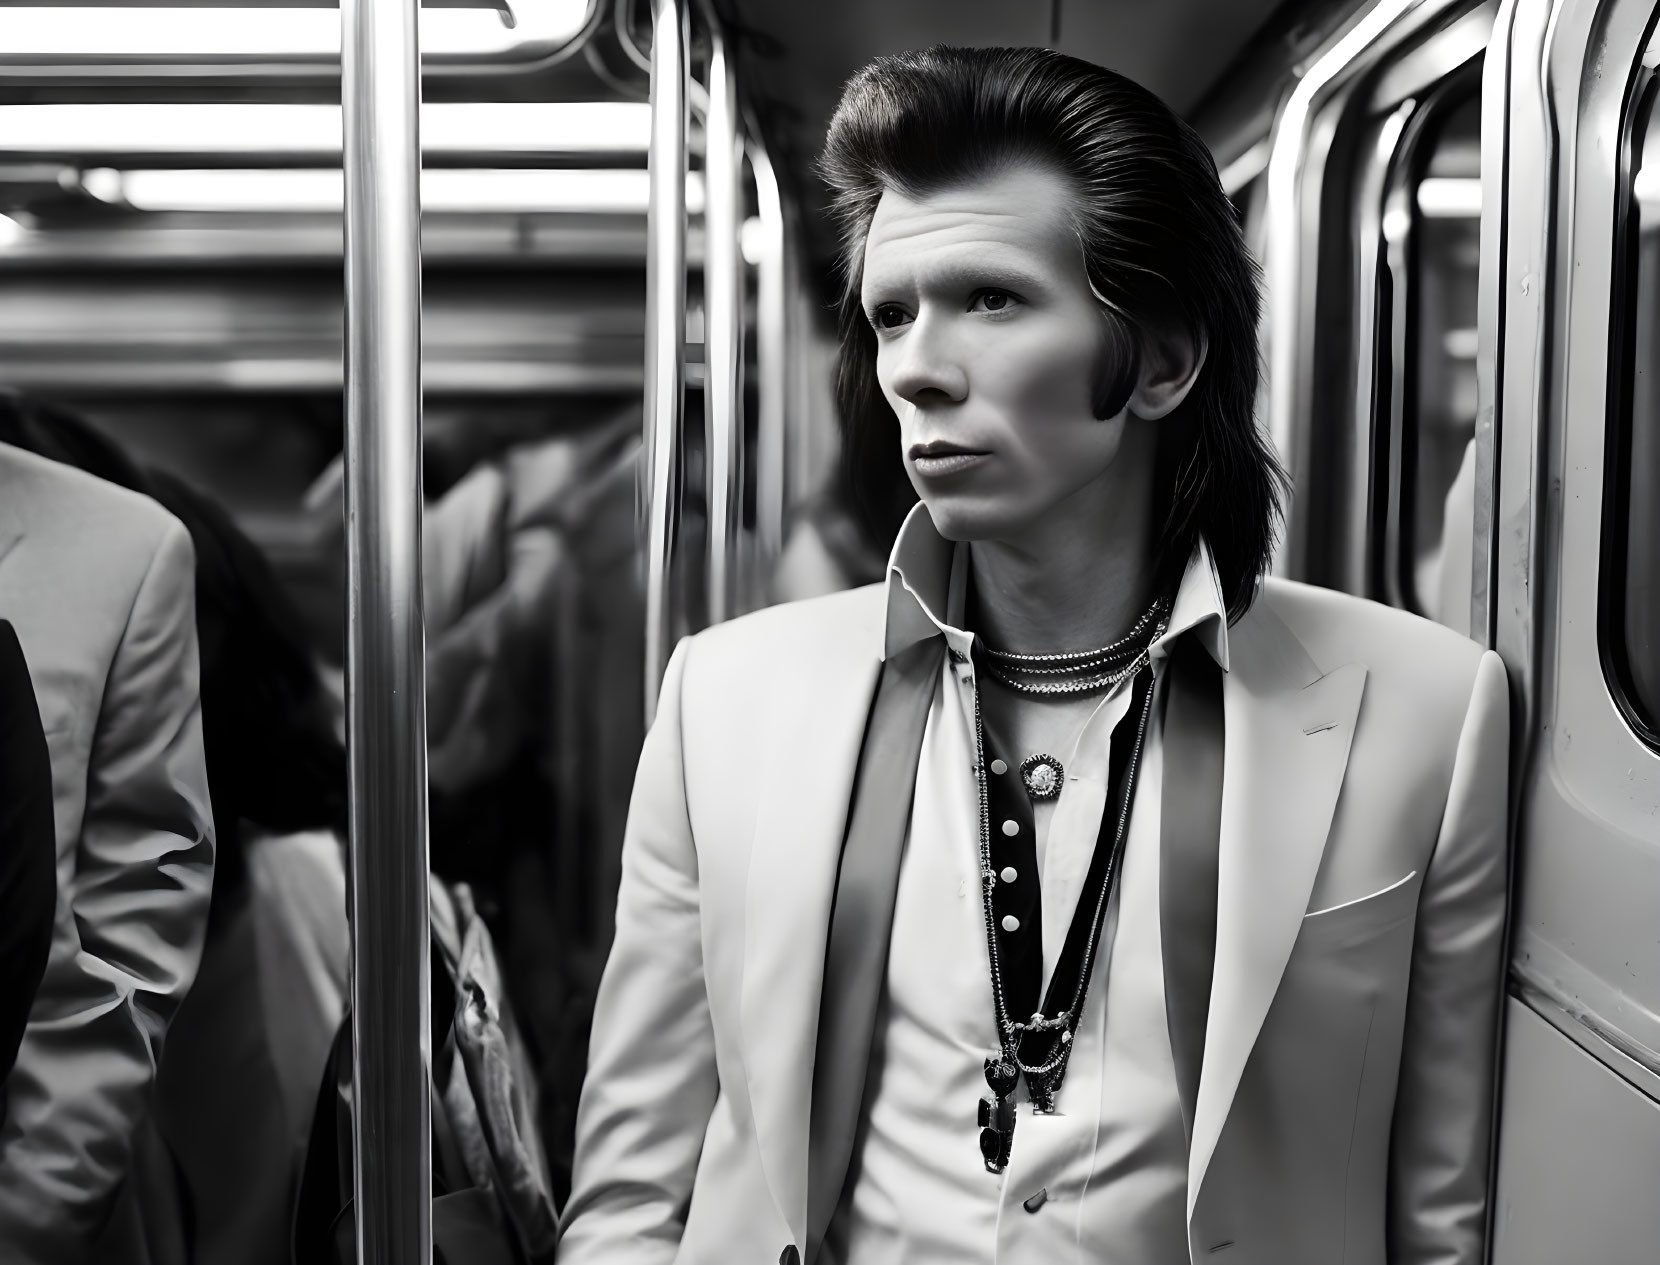 Fashionable individual in white suit with unique hairstyle on subway train gazes out window.